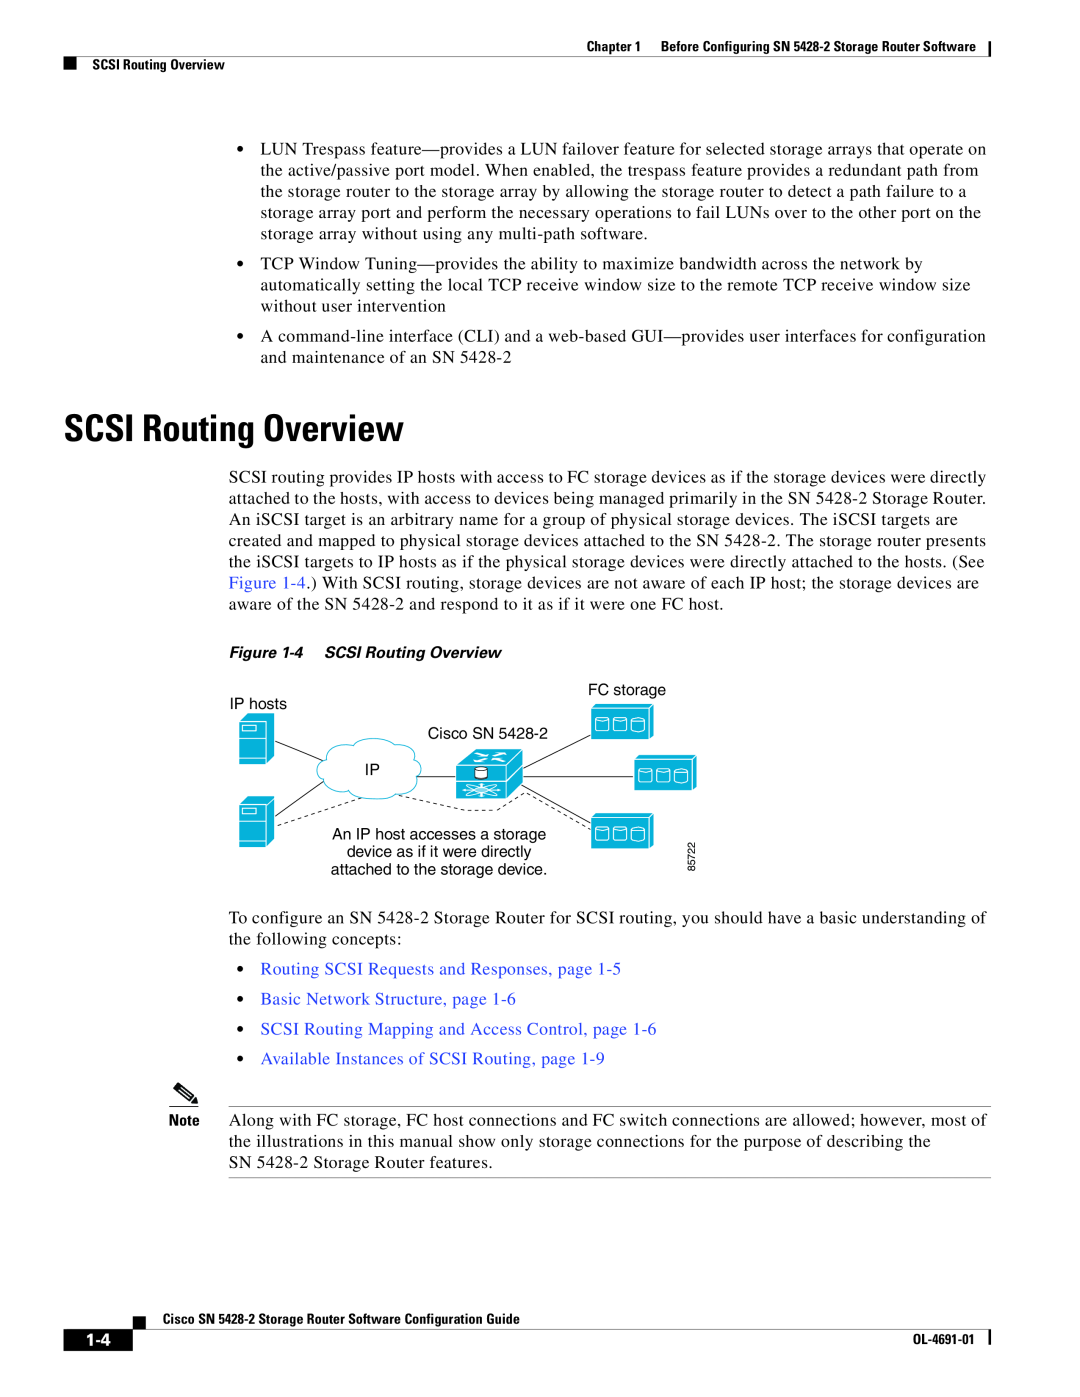 Cisco Systems SN 5428-2 SCSI Routing Overview, Routing SCSI Requests and Responses, page, Basic Network Structure, page 